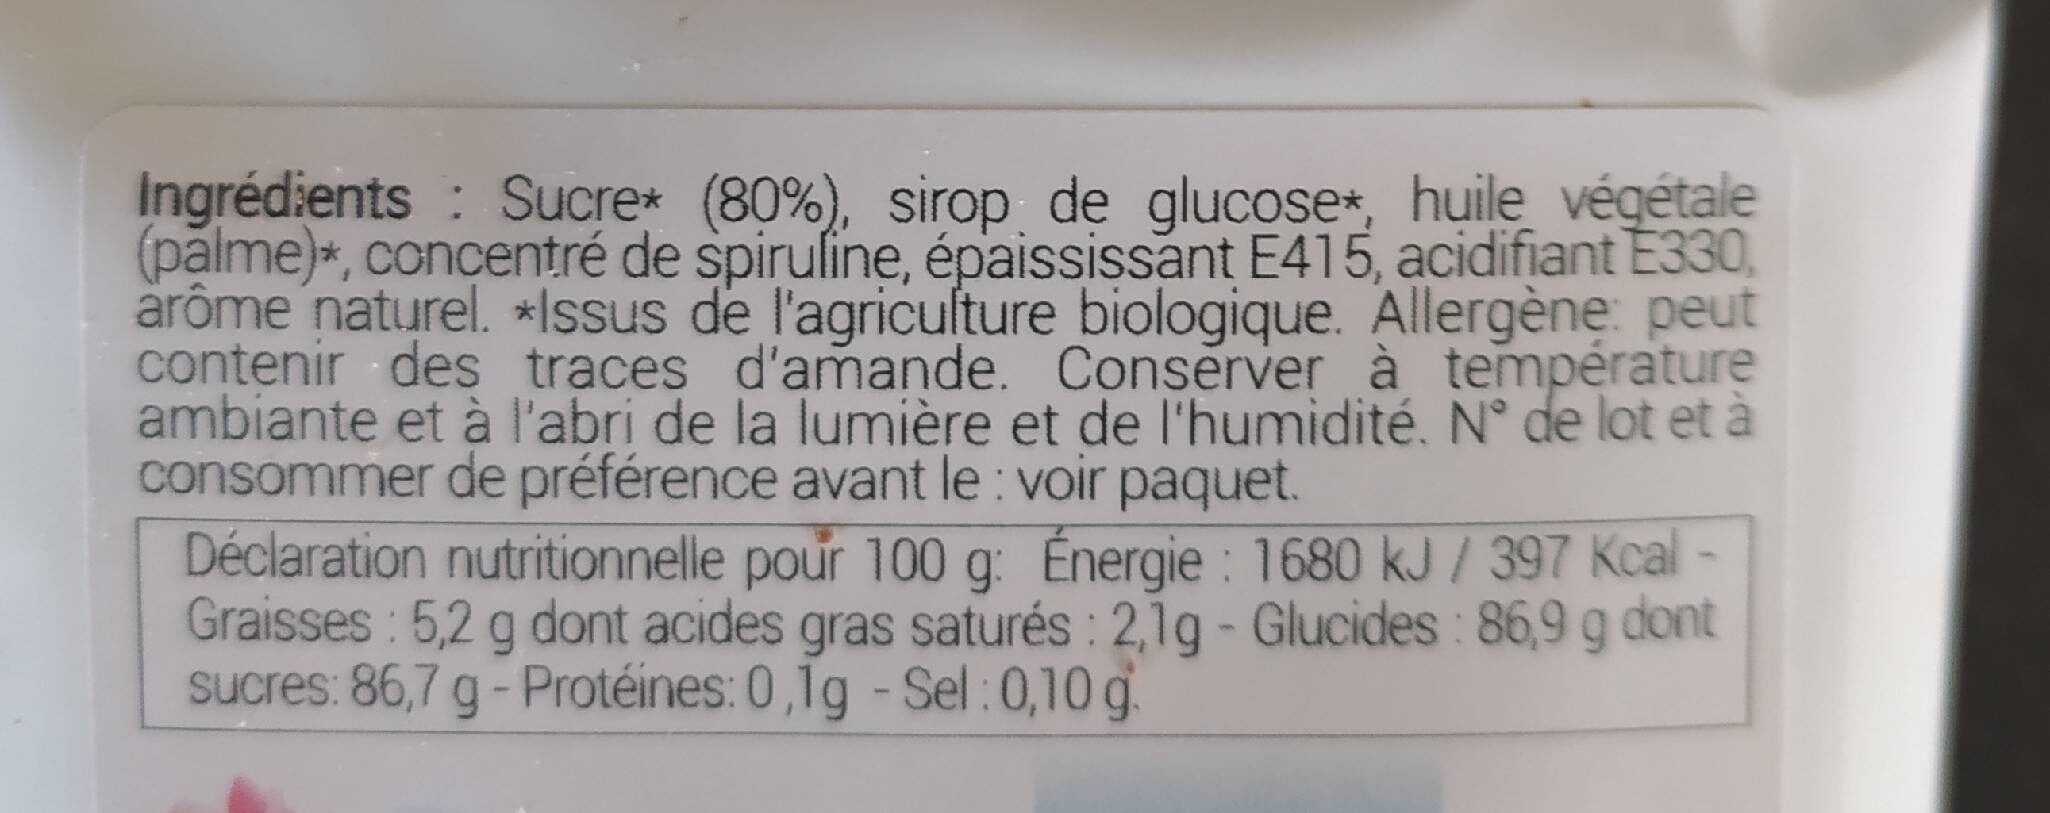 Sucre glace - Nutrition facts - fr